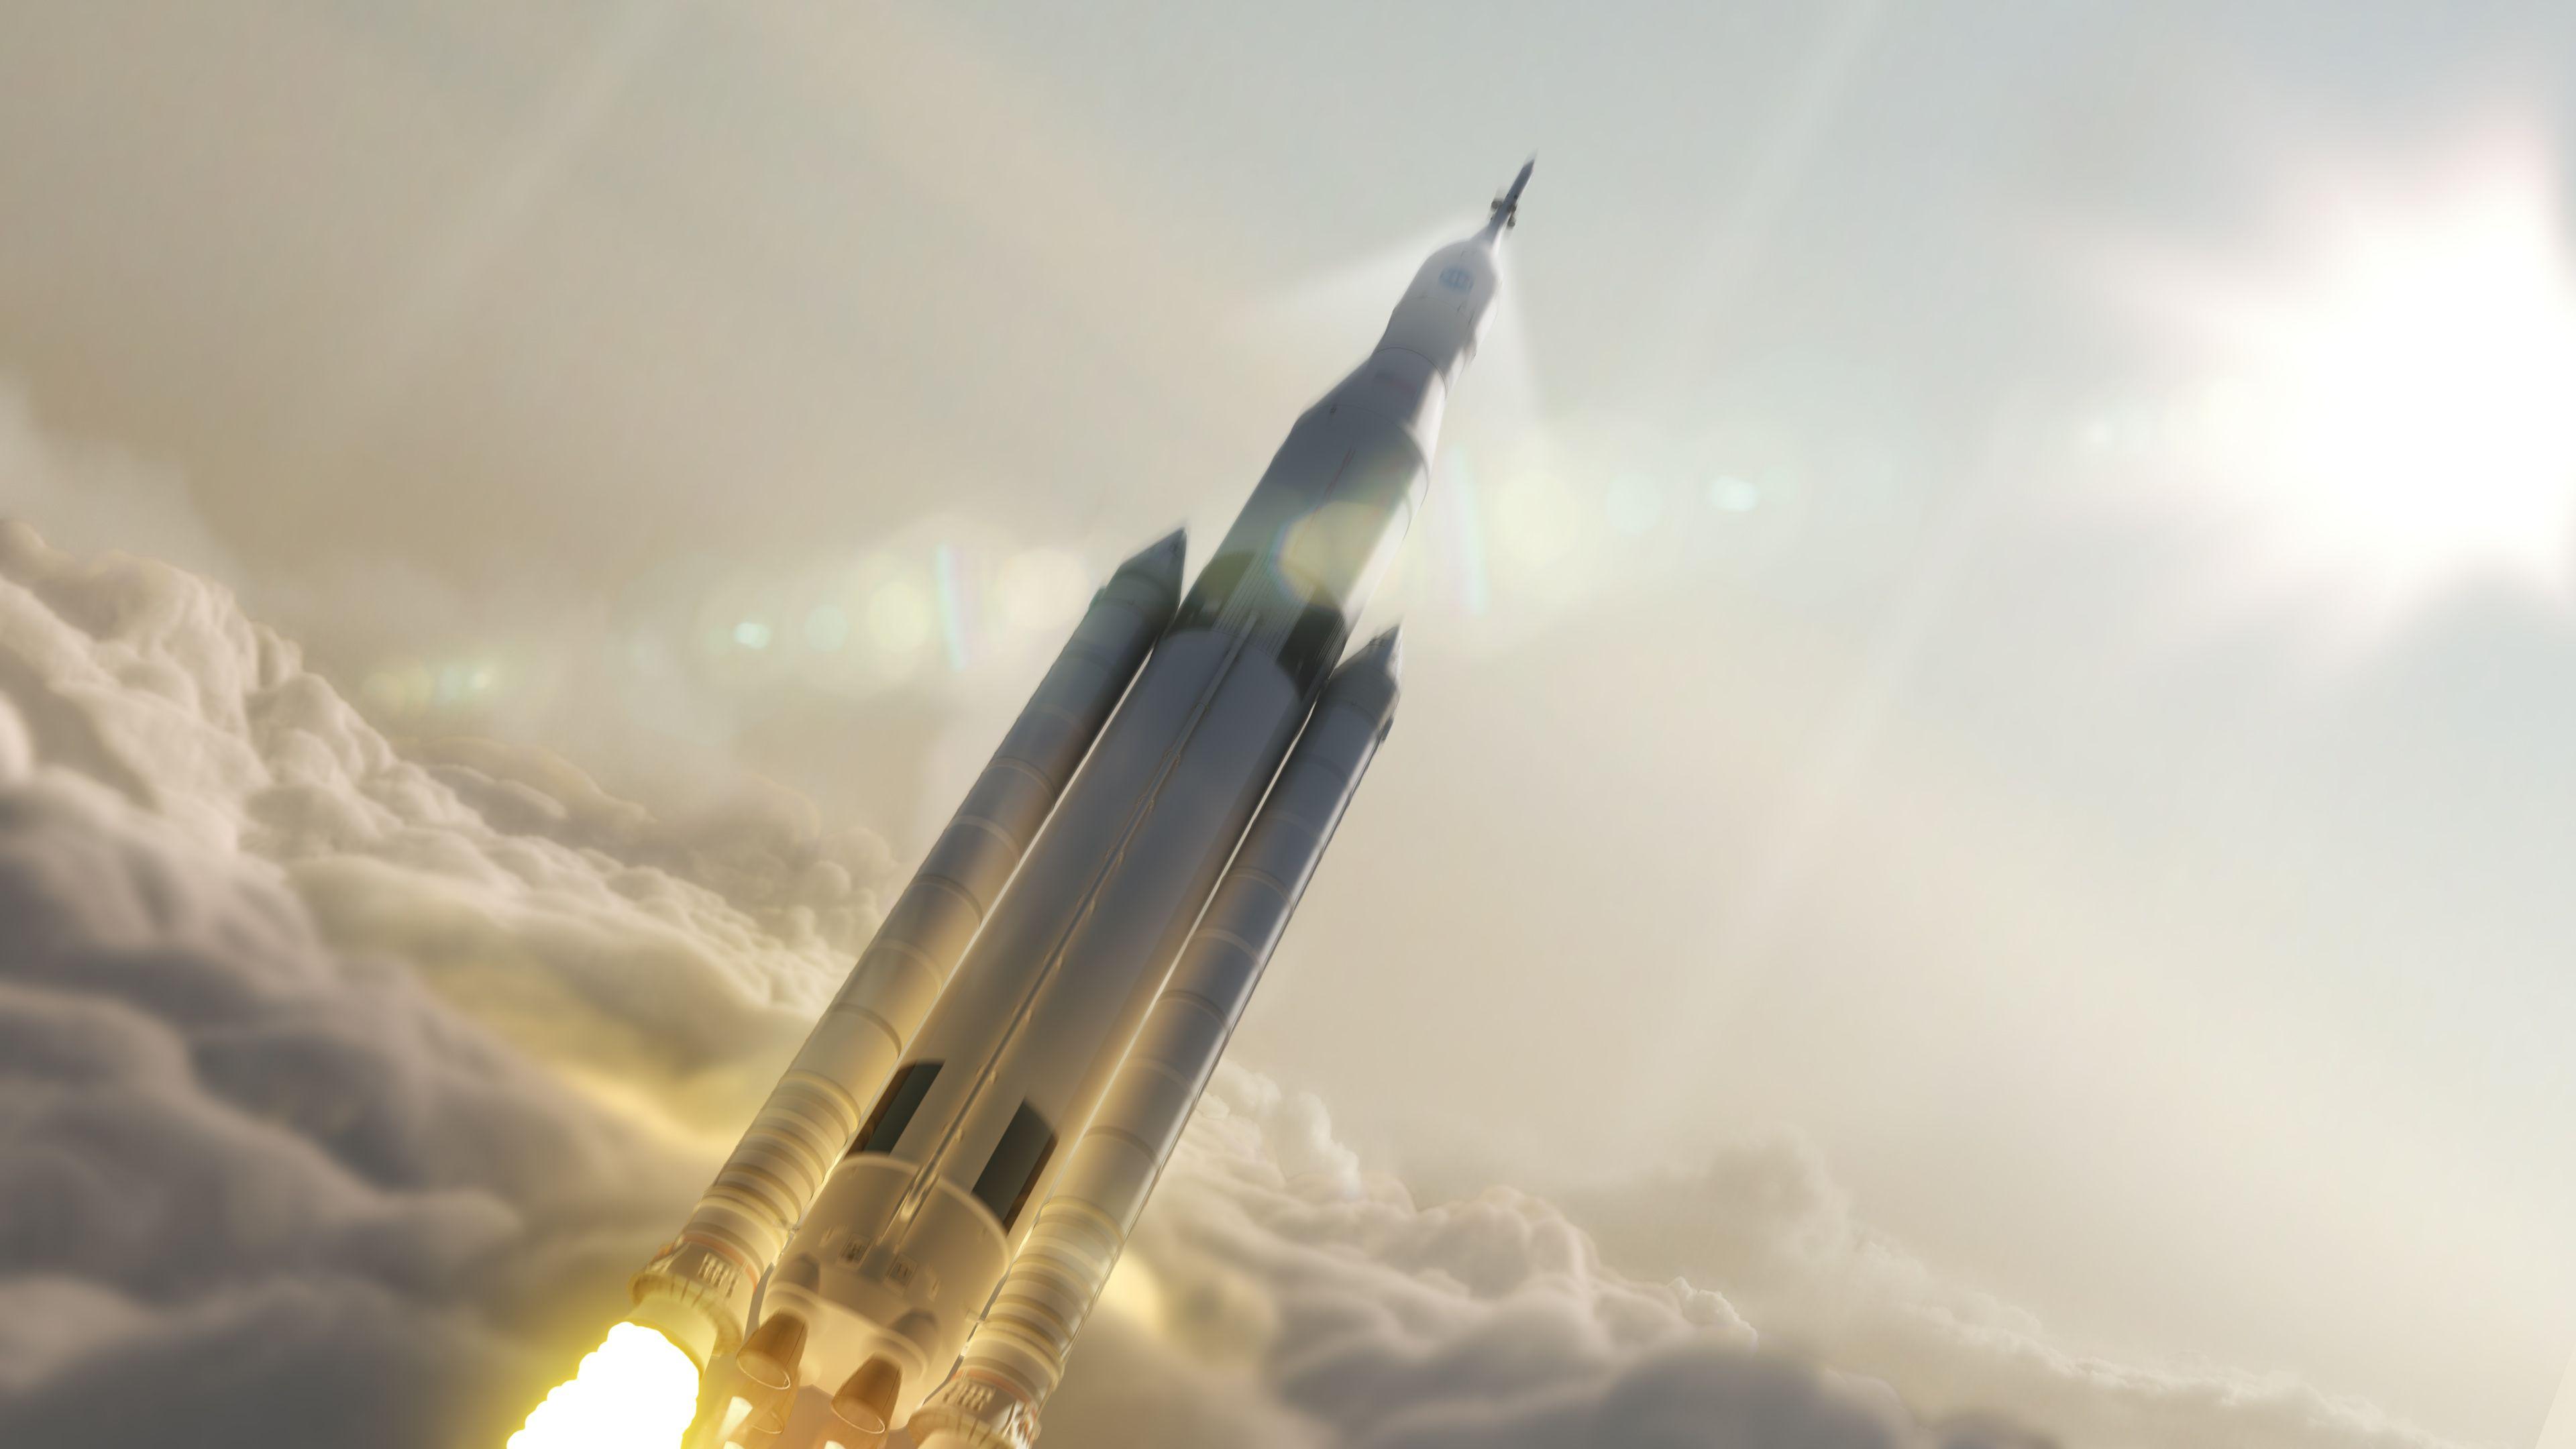 NASA Completes Key Review of World's Most Powerful Rocket in Support